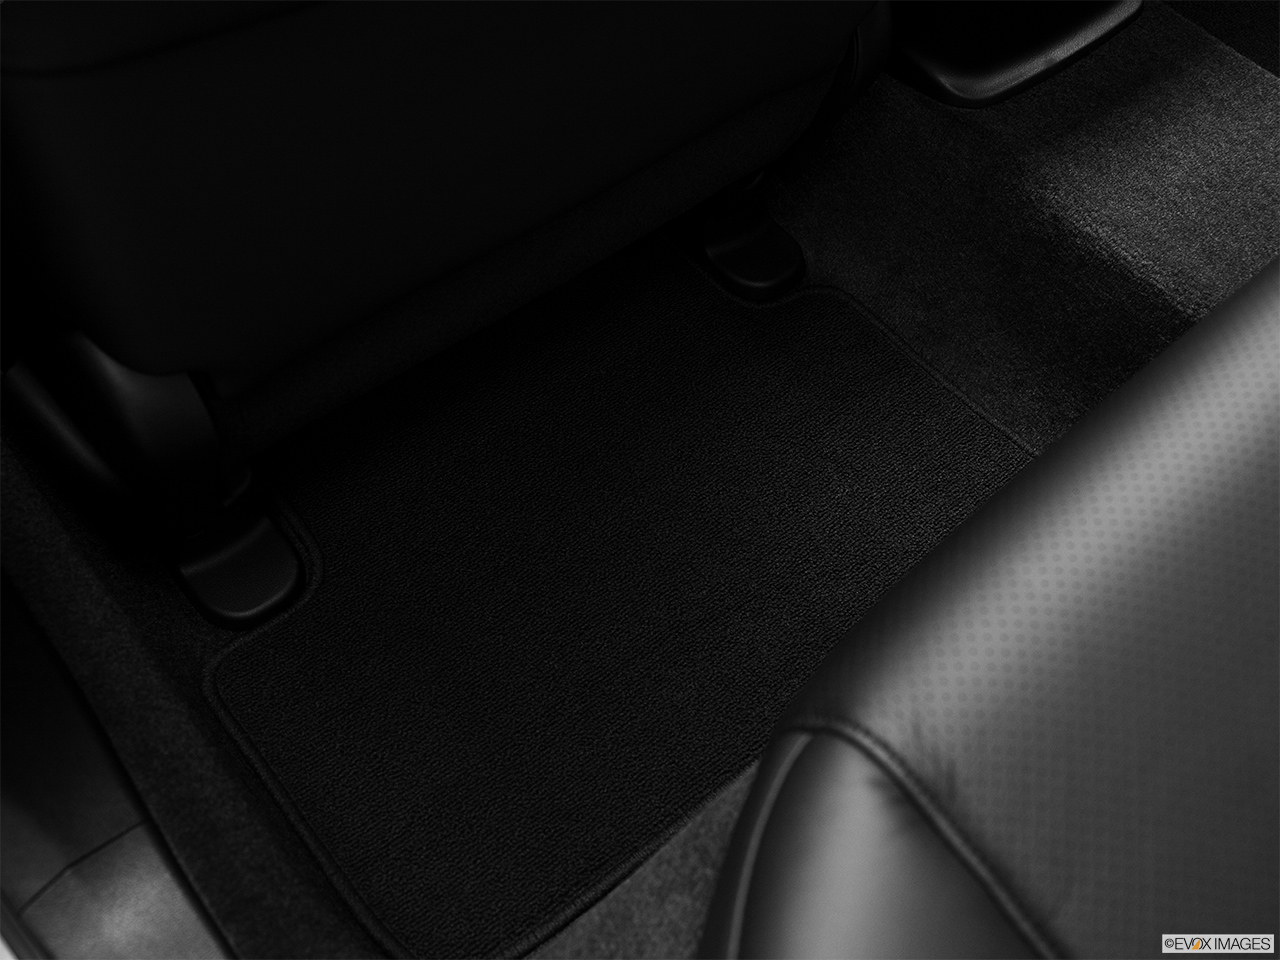 2012 Acura TL TL Rear driver's side floor mat. Mid-seat level from outside looking in. 